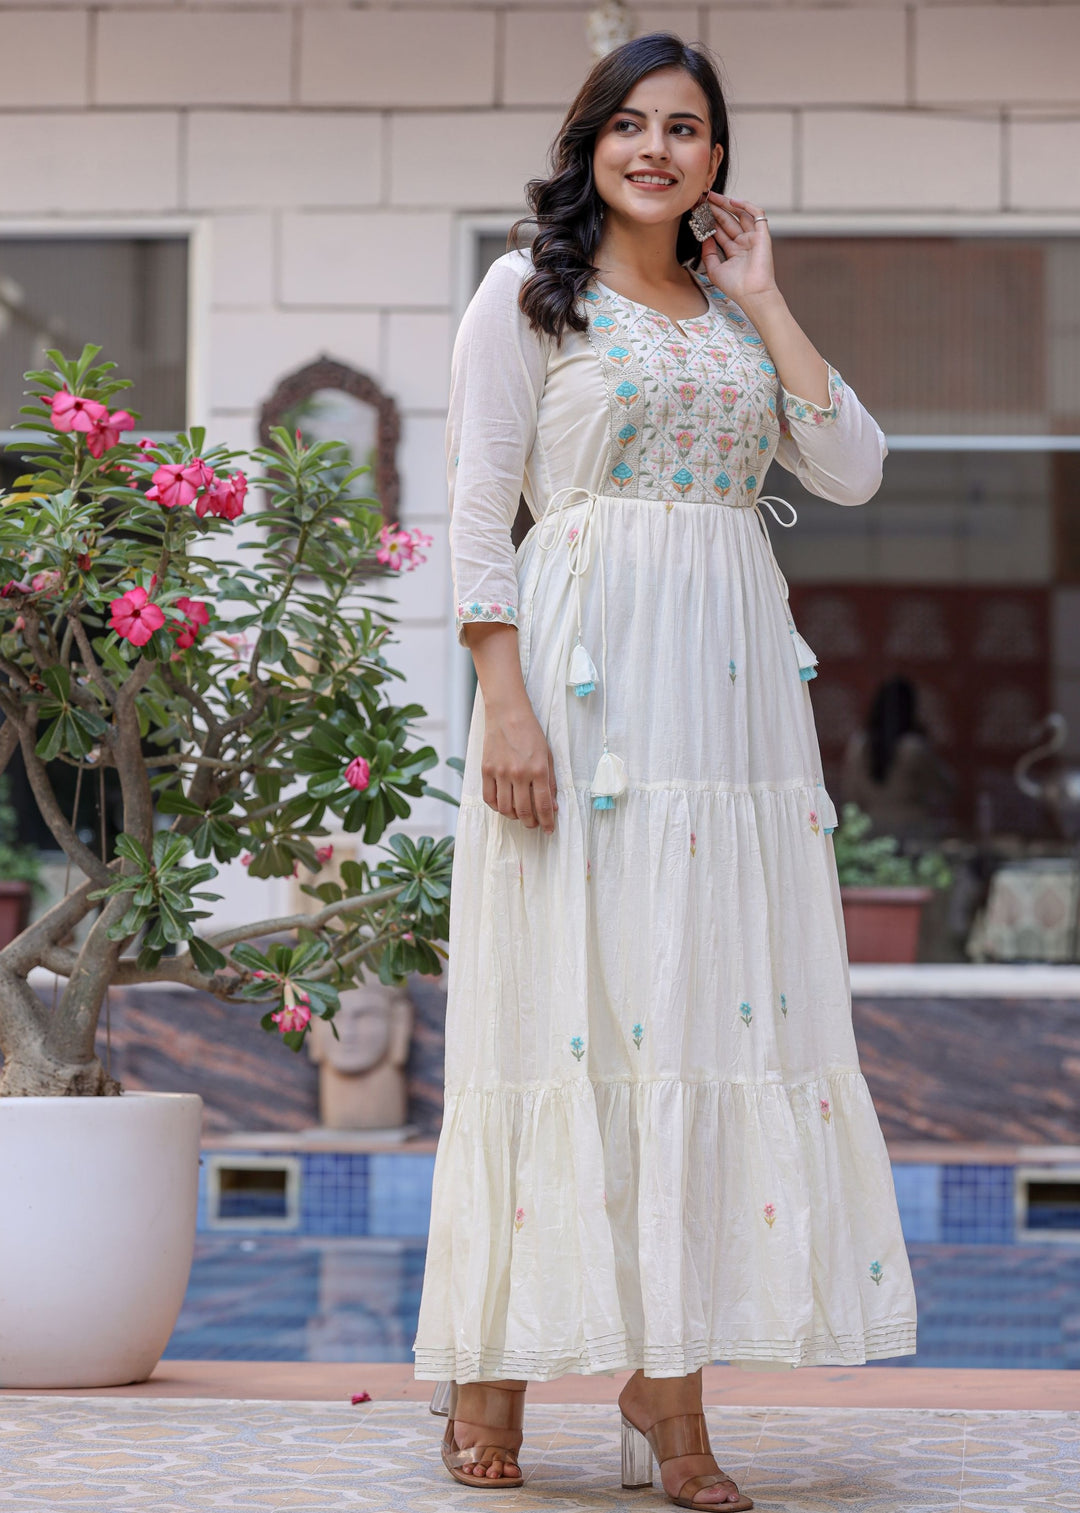 Buy a White Ethnic Dress for Women Online | Best Designer Ethnic Gown in India